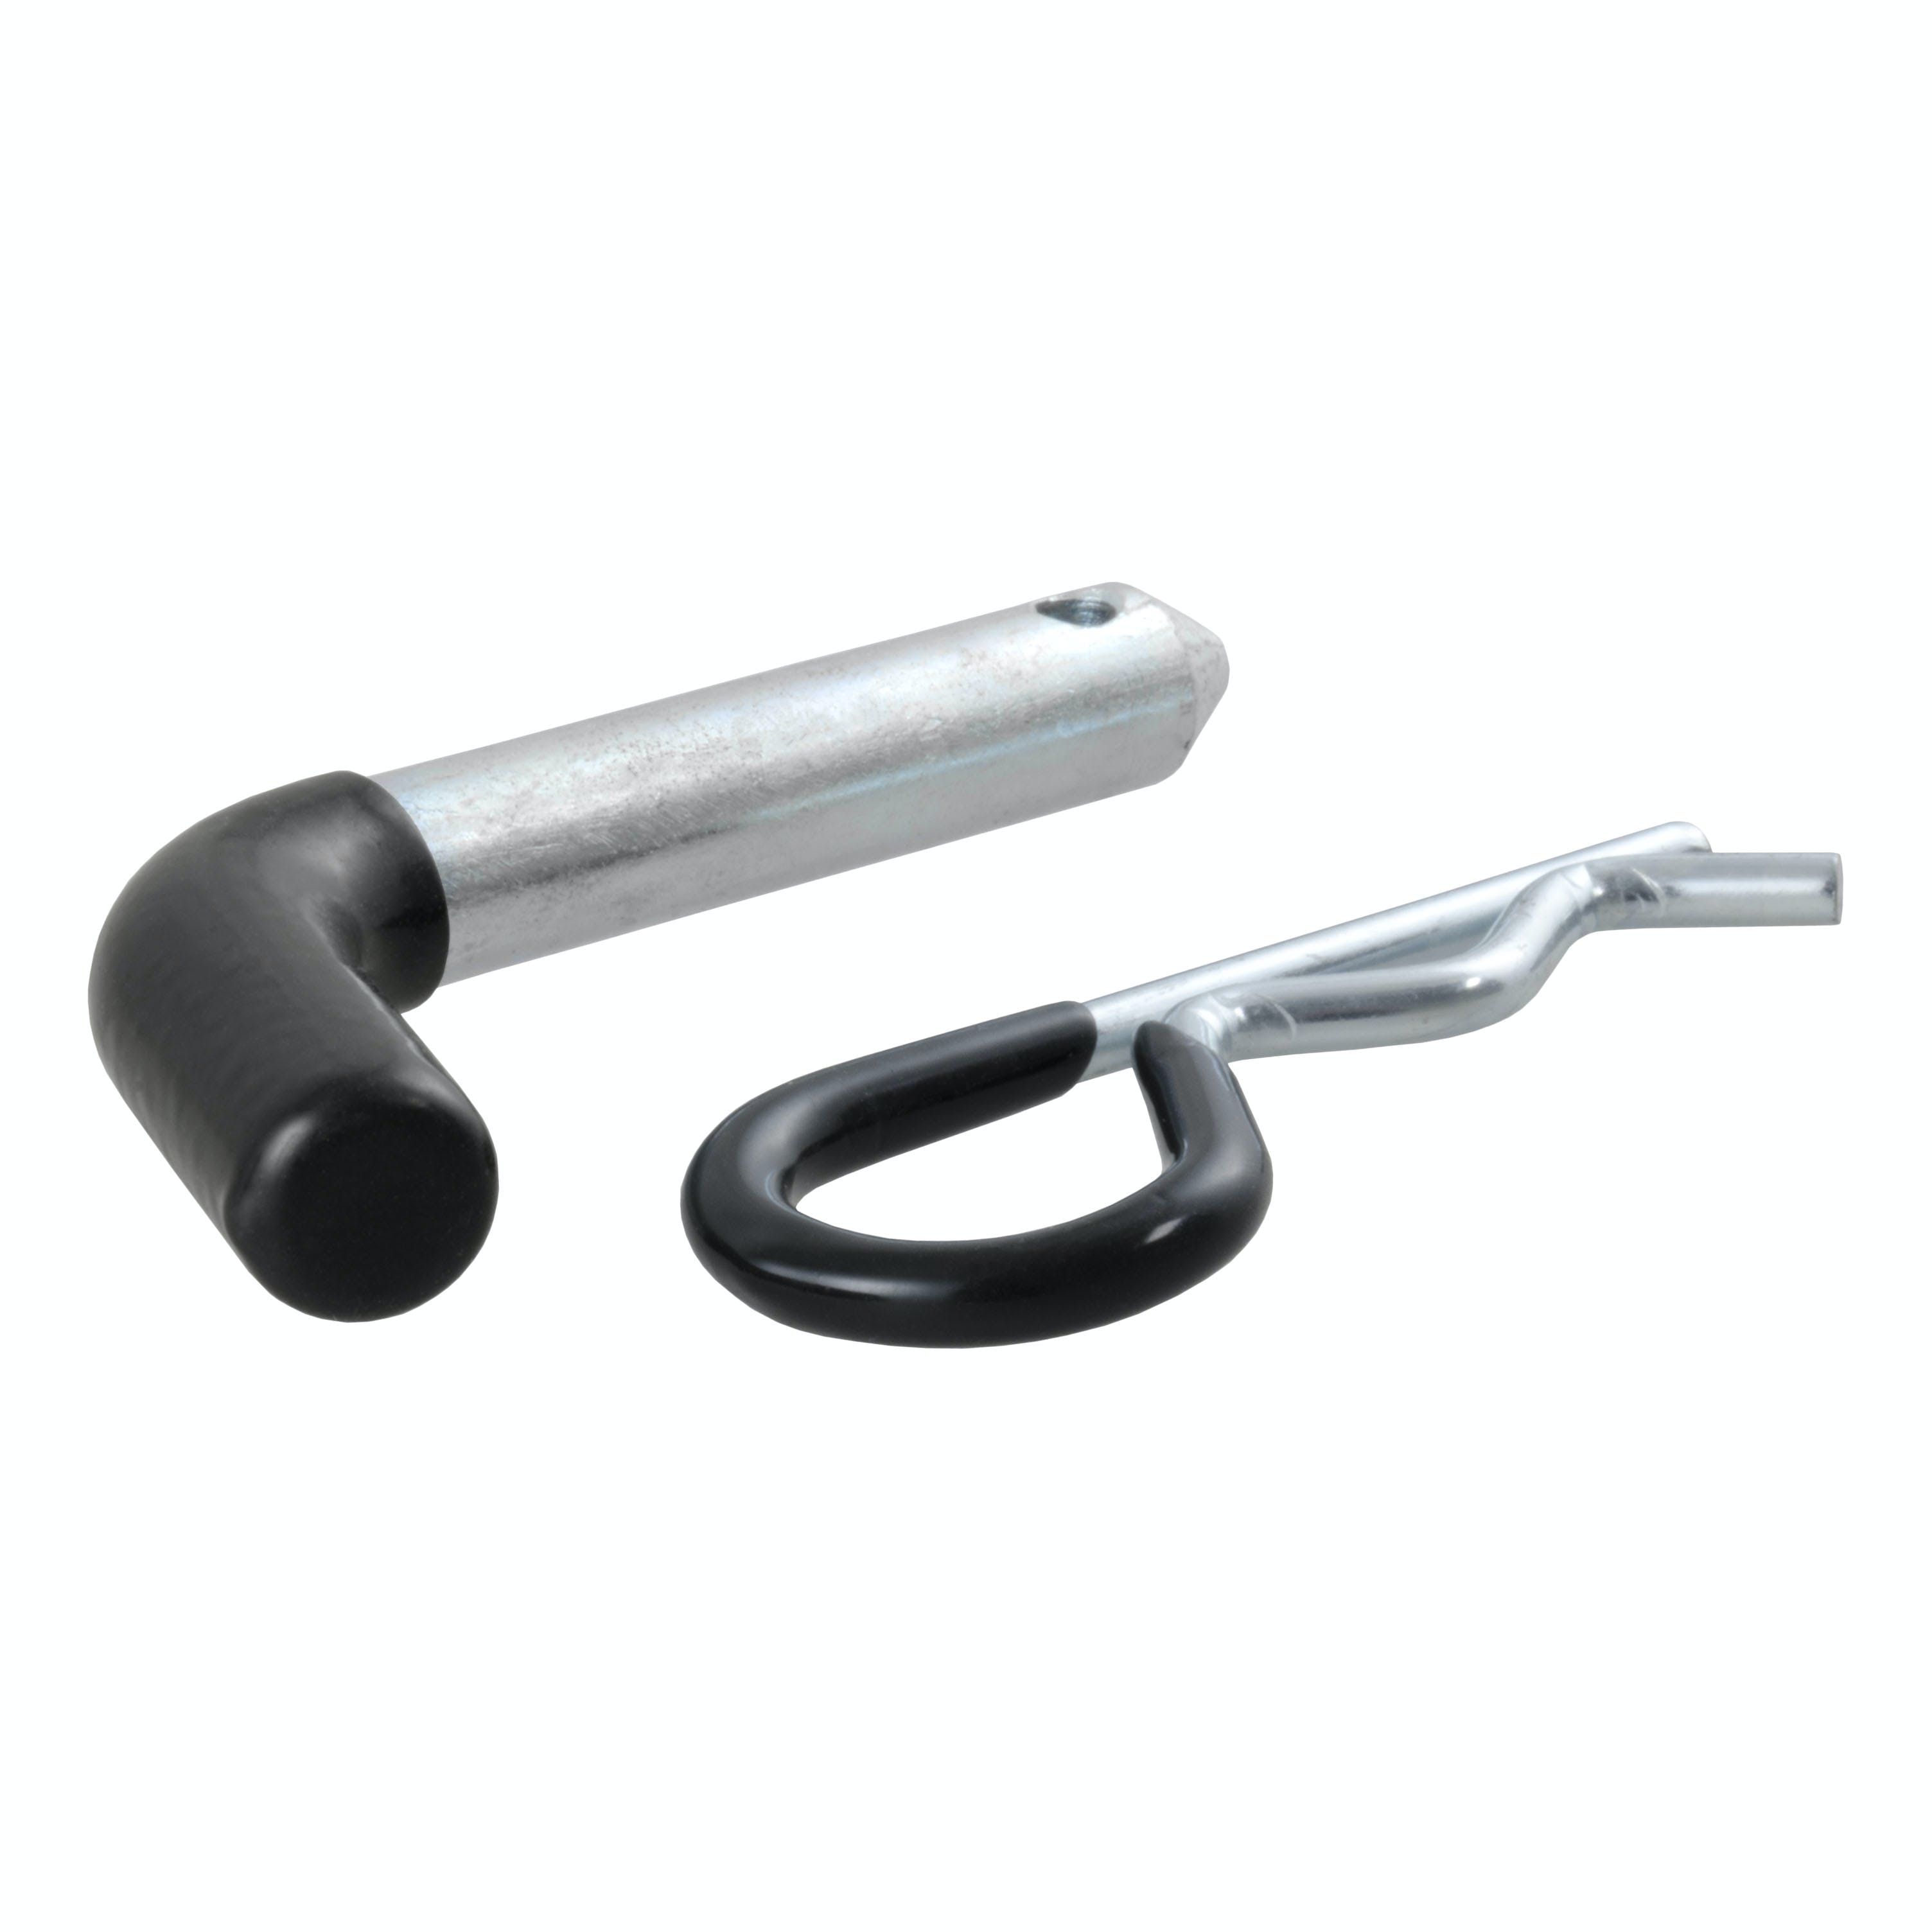 CURT 21411 1/2 Hitch Pin (1-1/4 Receiver, Zinc with Rubber Grip, Packaged)